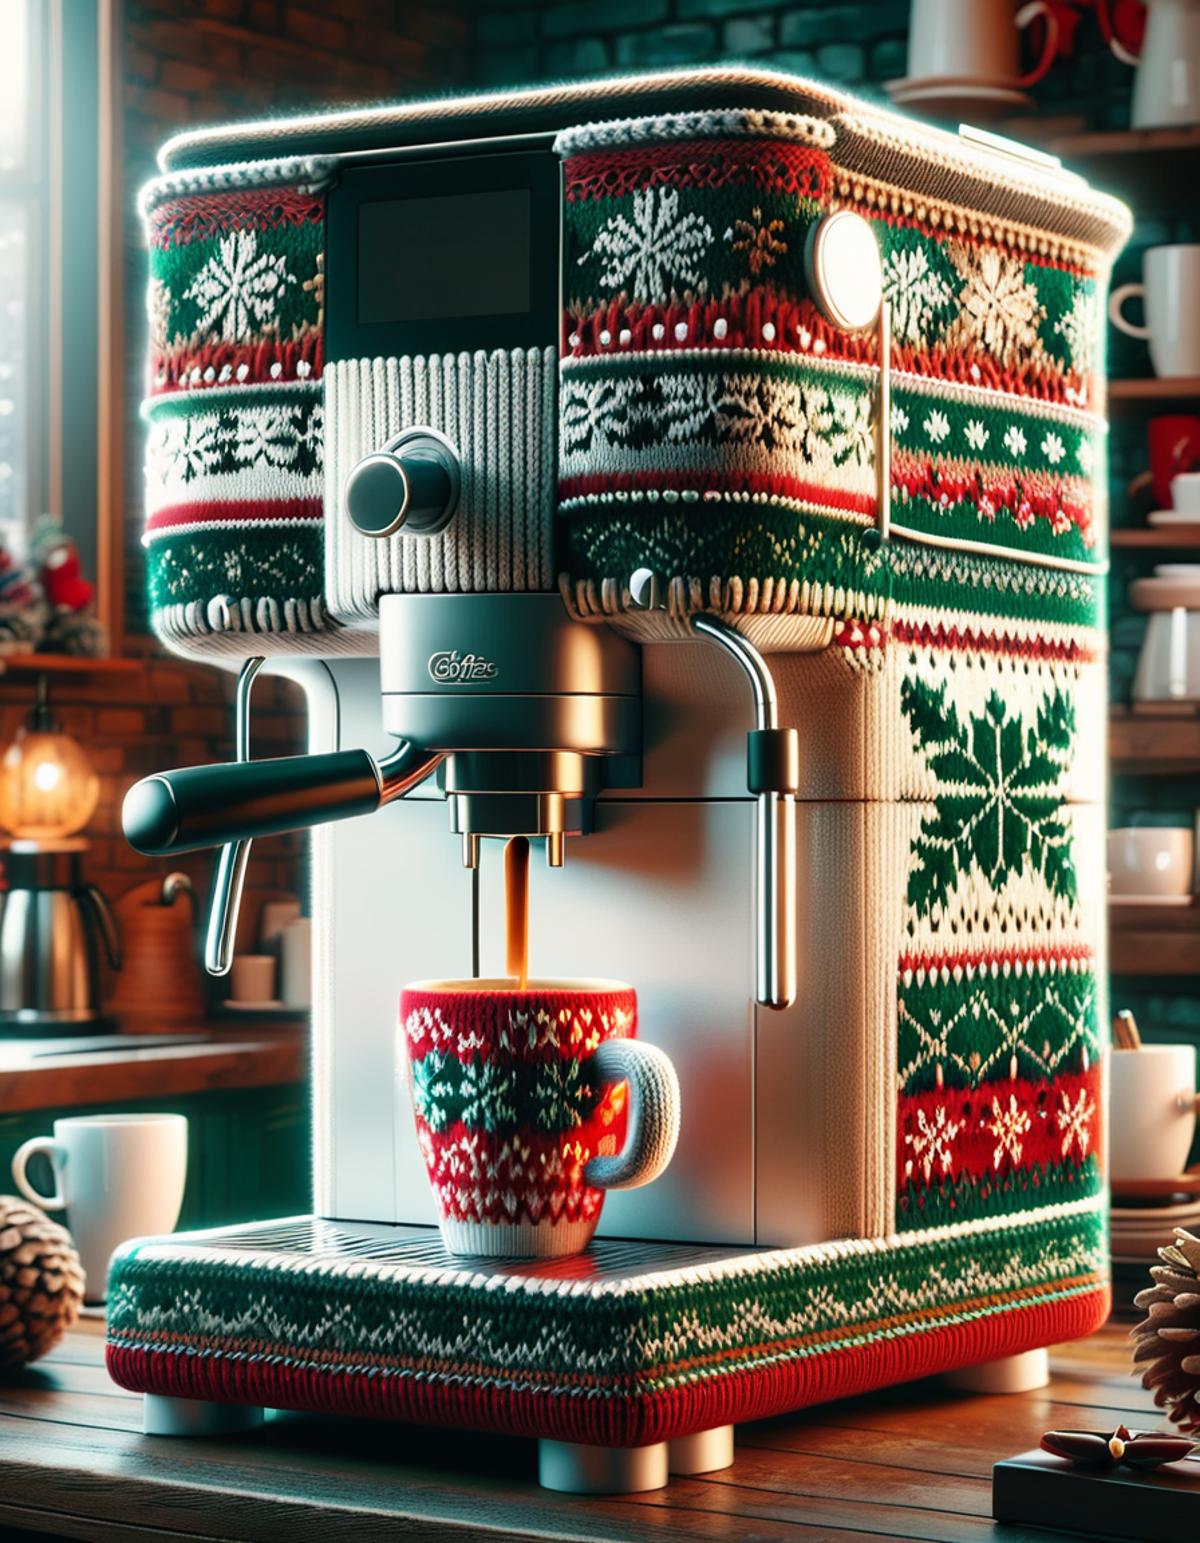 A coffee maker with a Christmas-themed design.